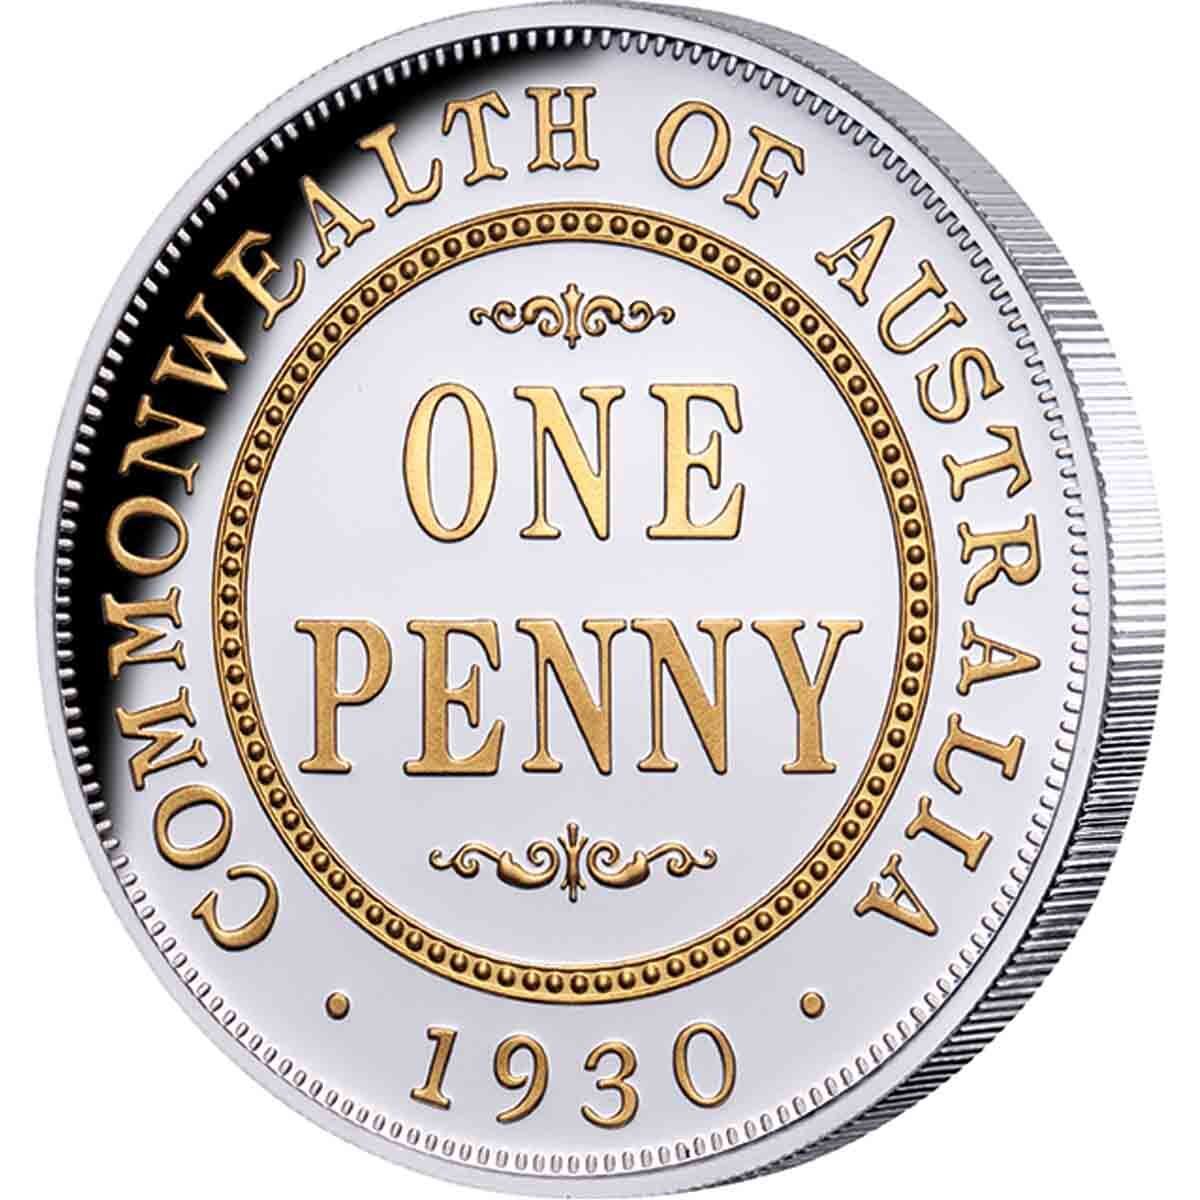 2020 $1 90th Anniversary of the 1930 Penny Gilded Silver Proof Coin